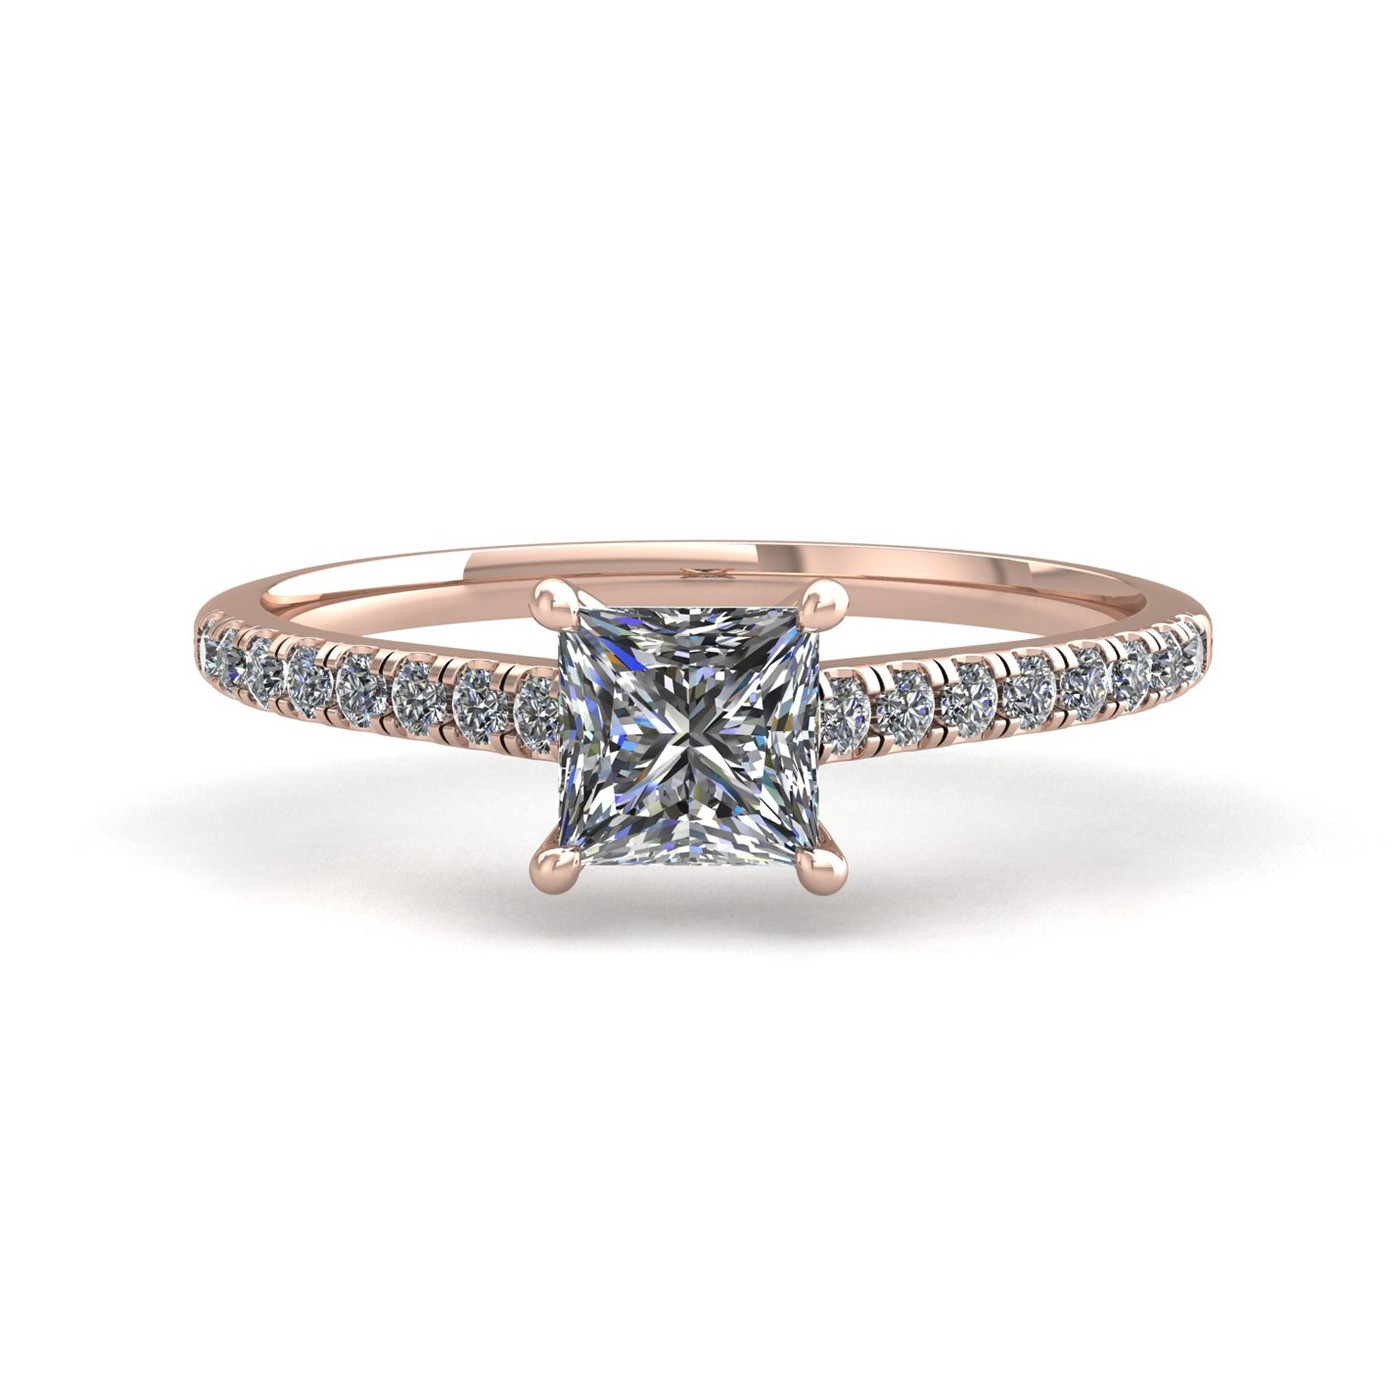 18k rose gold  2,50 ct 4 prongs princess cut diamond engagement ring with whisper thin pavÉ set band Photos & images